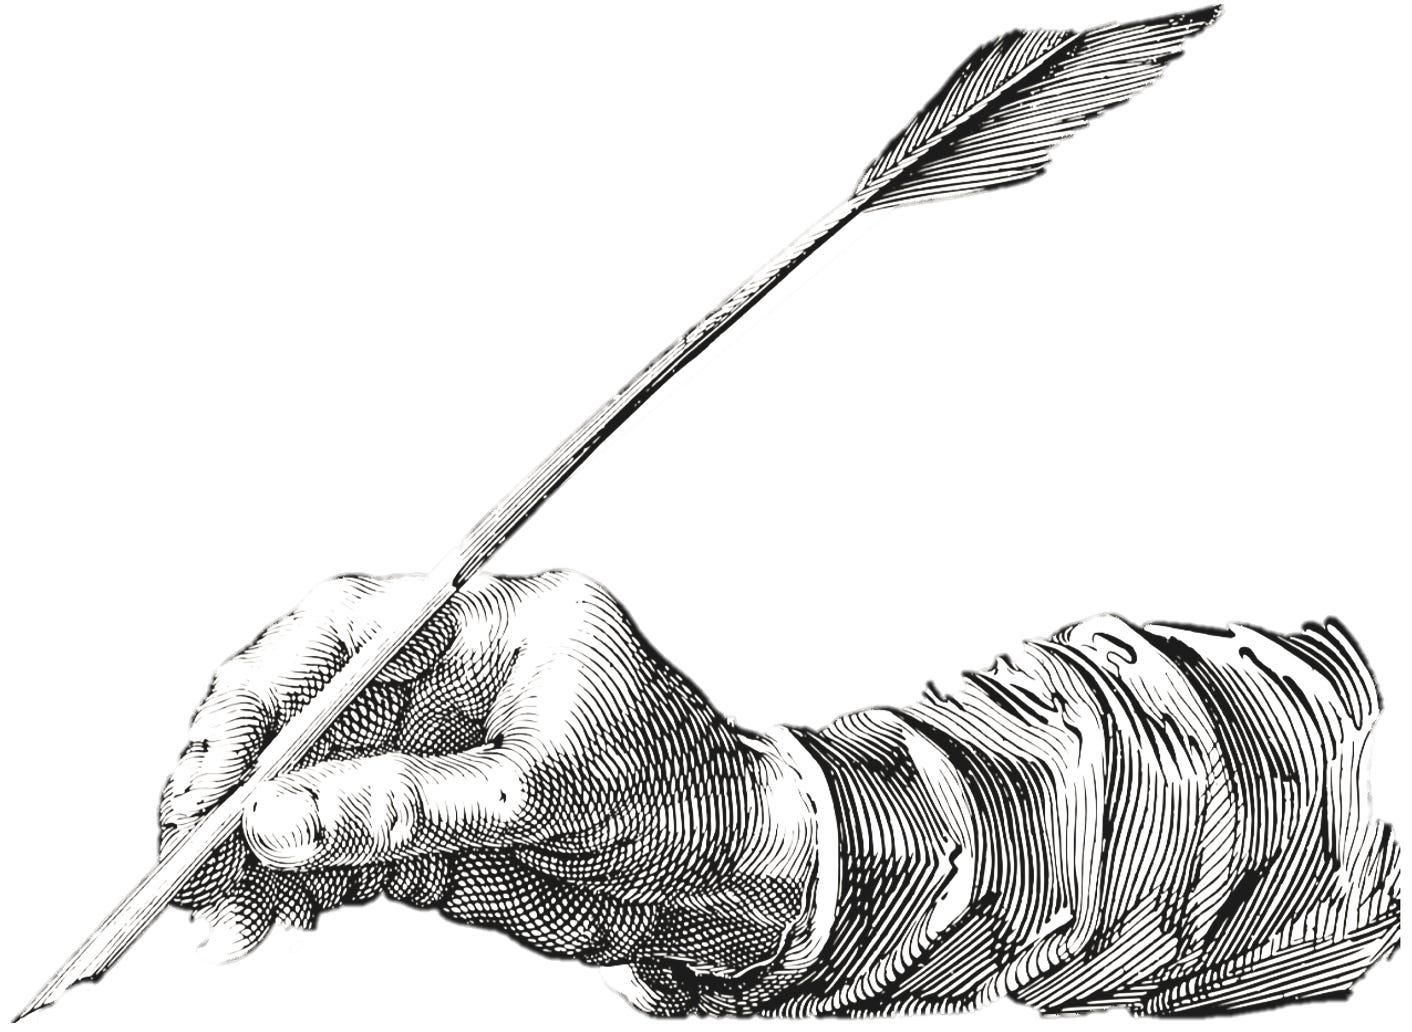 Black and white illustration of a hand writing with a quill